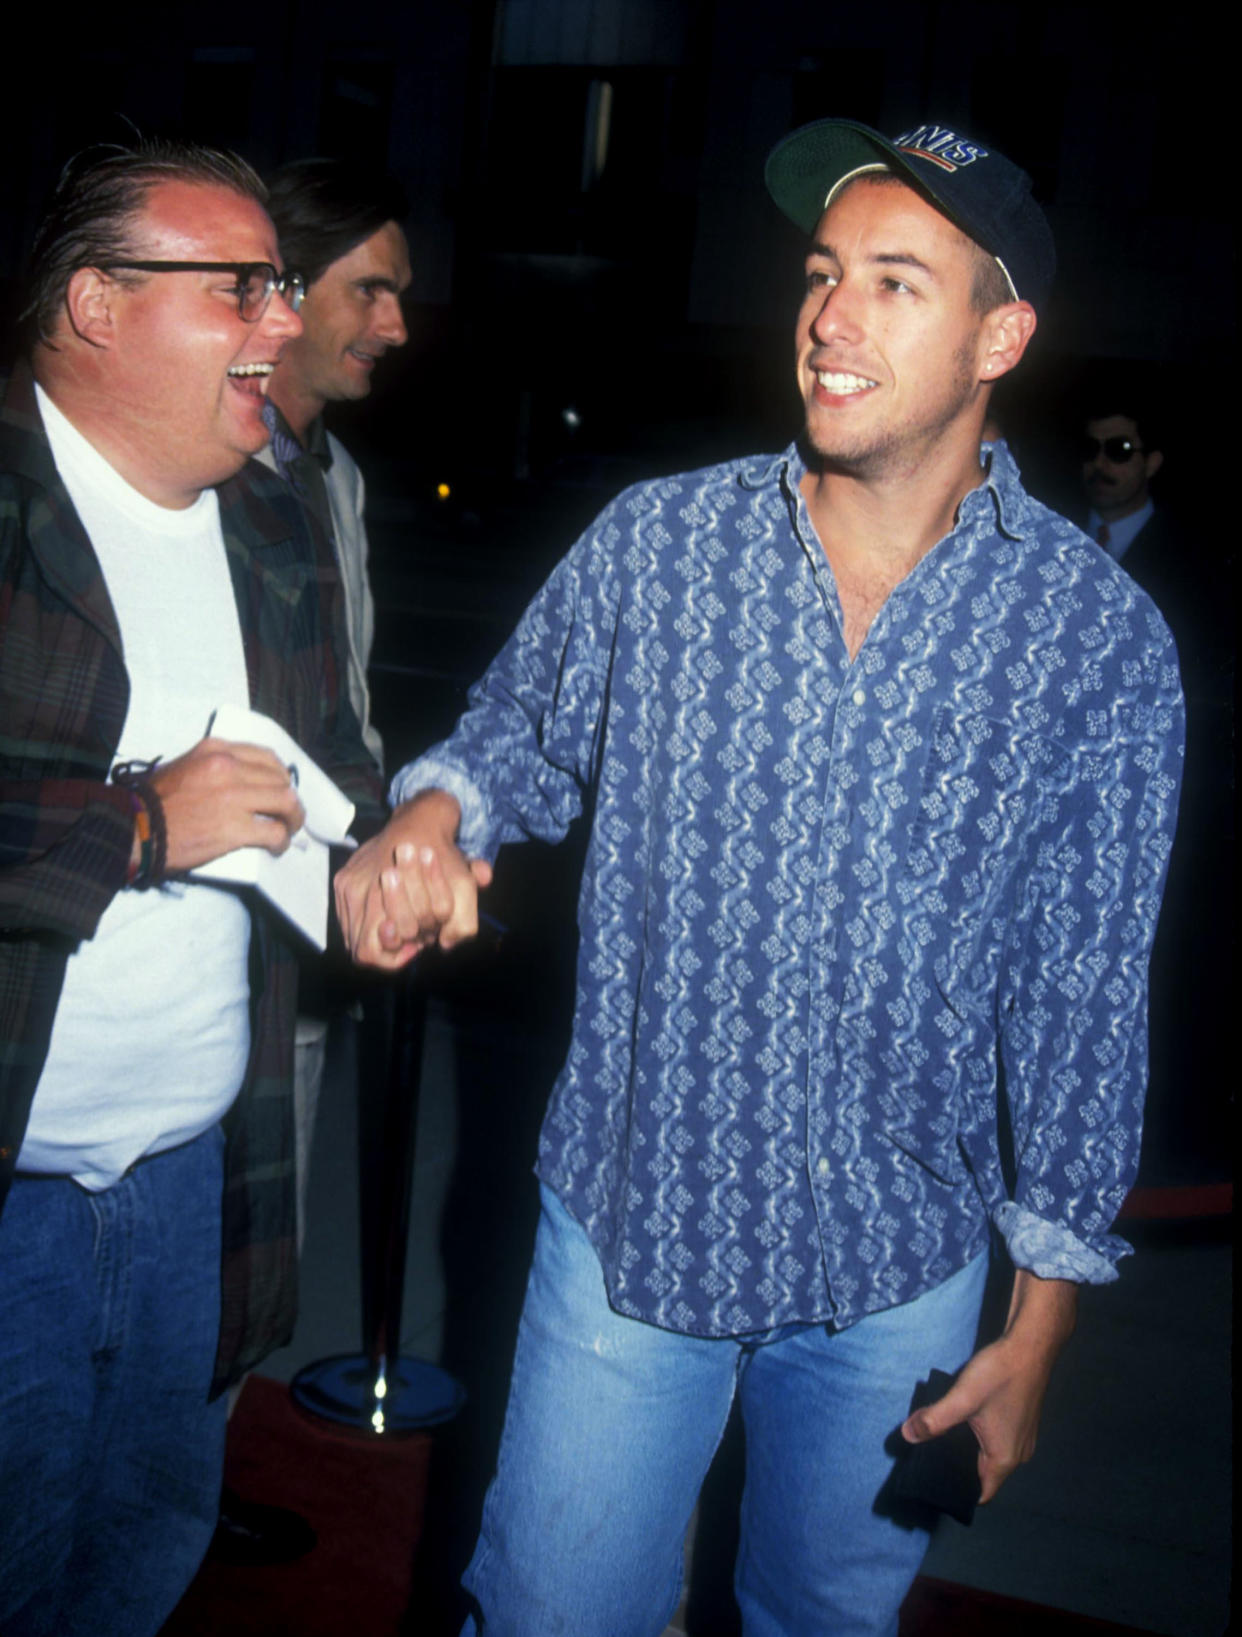 Chris Farley and Adam Sandler hang out in Beverly Hills, Calif., circa 1993. (Photo: Barry King/WireImage)